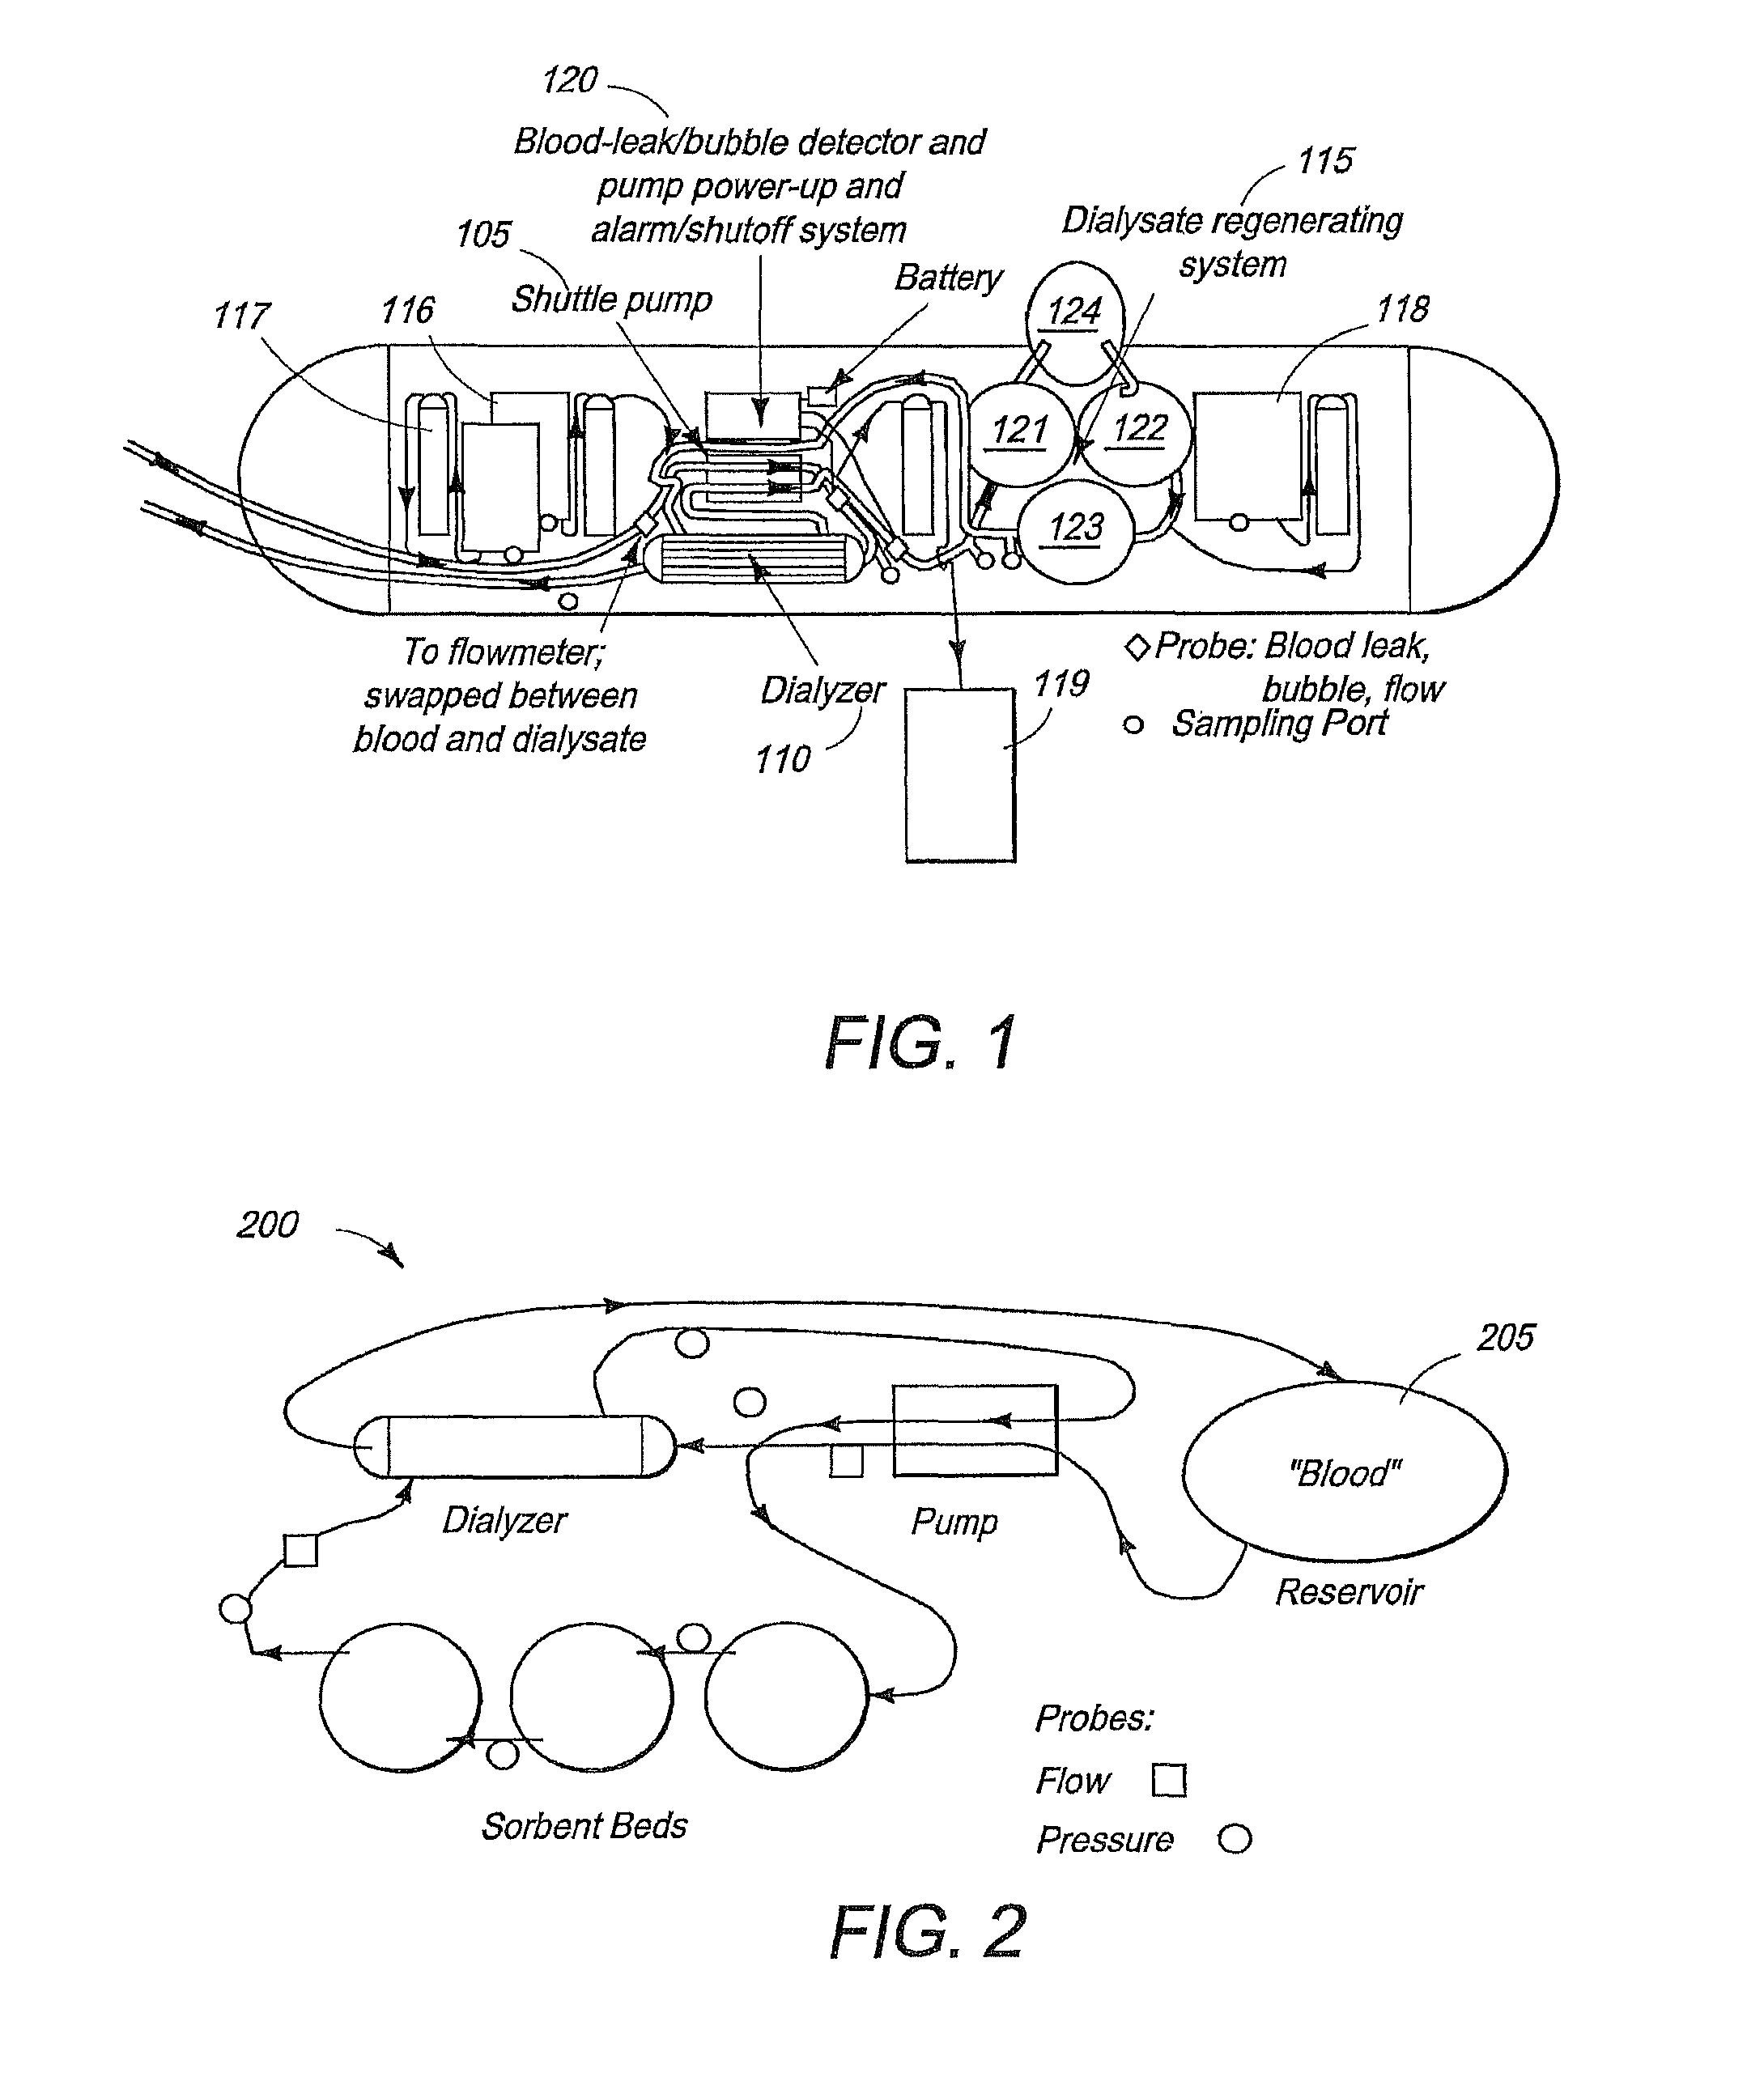 Carbon dioxide gas removal from a fluid circuit of a dialysis device